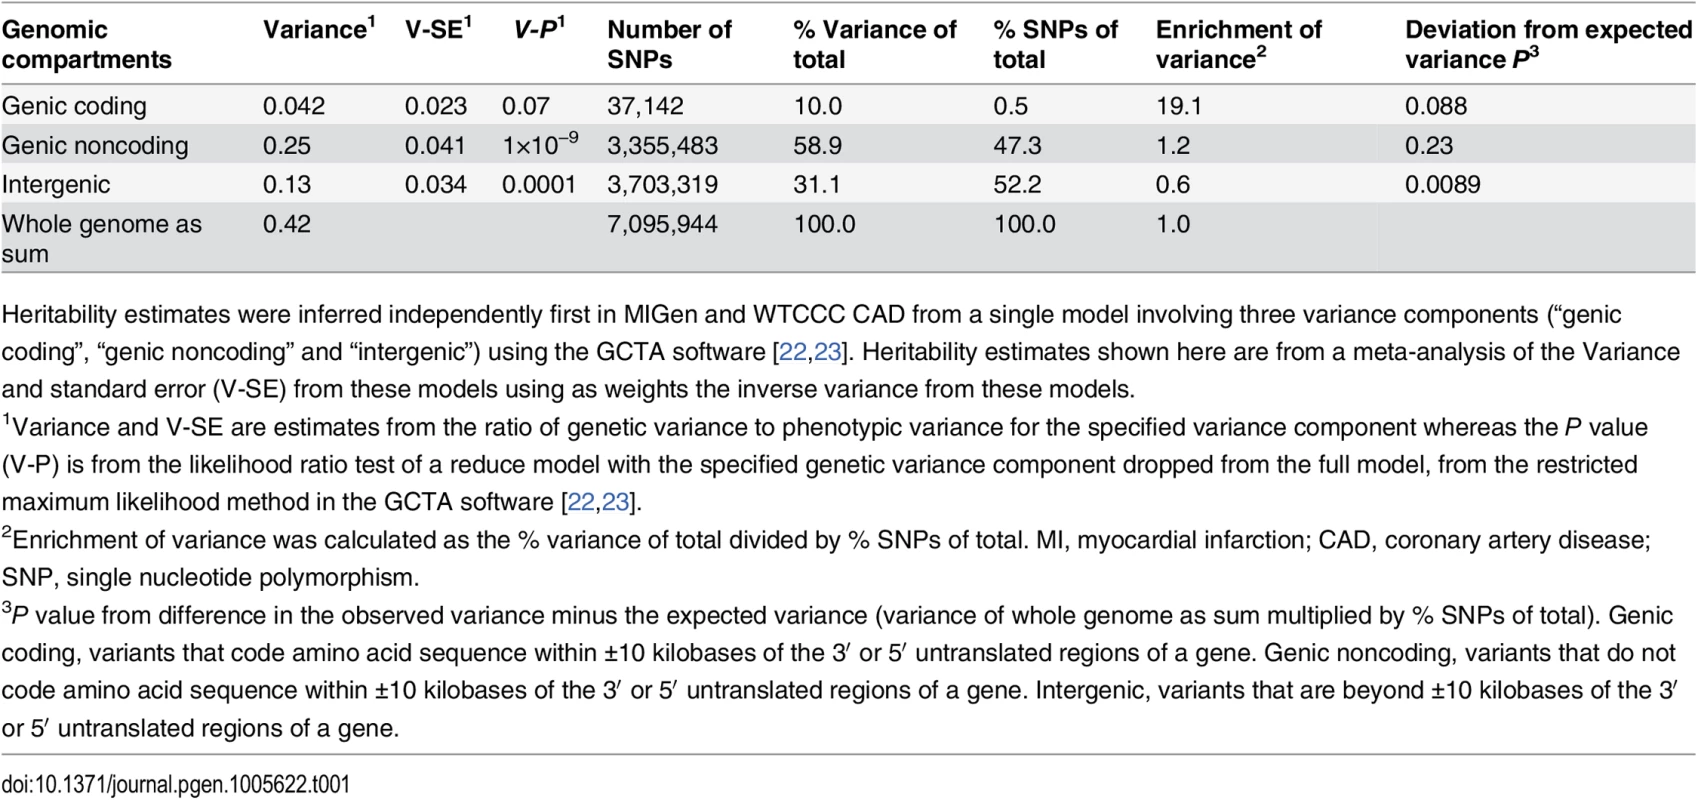 Heritability of MI/CAD explained by three genomic compartment sets.